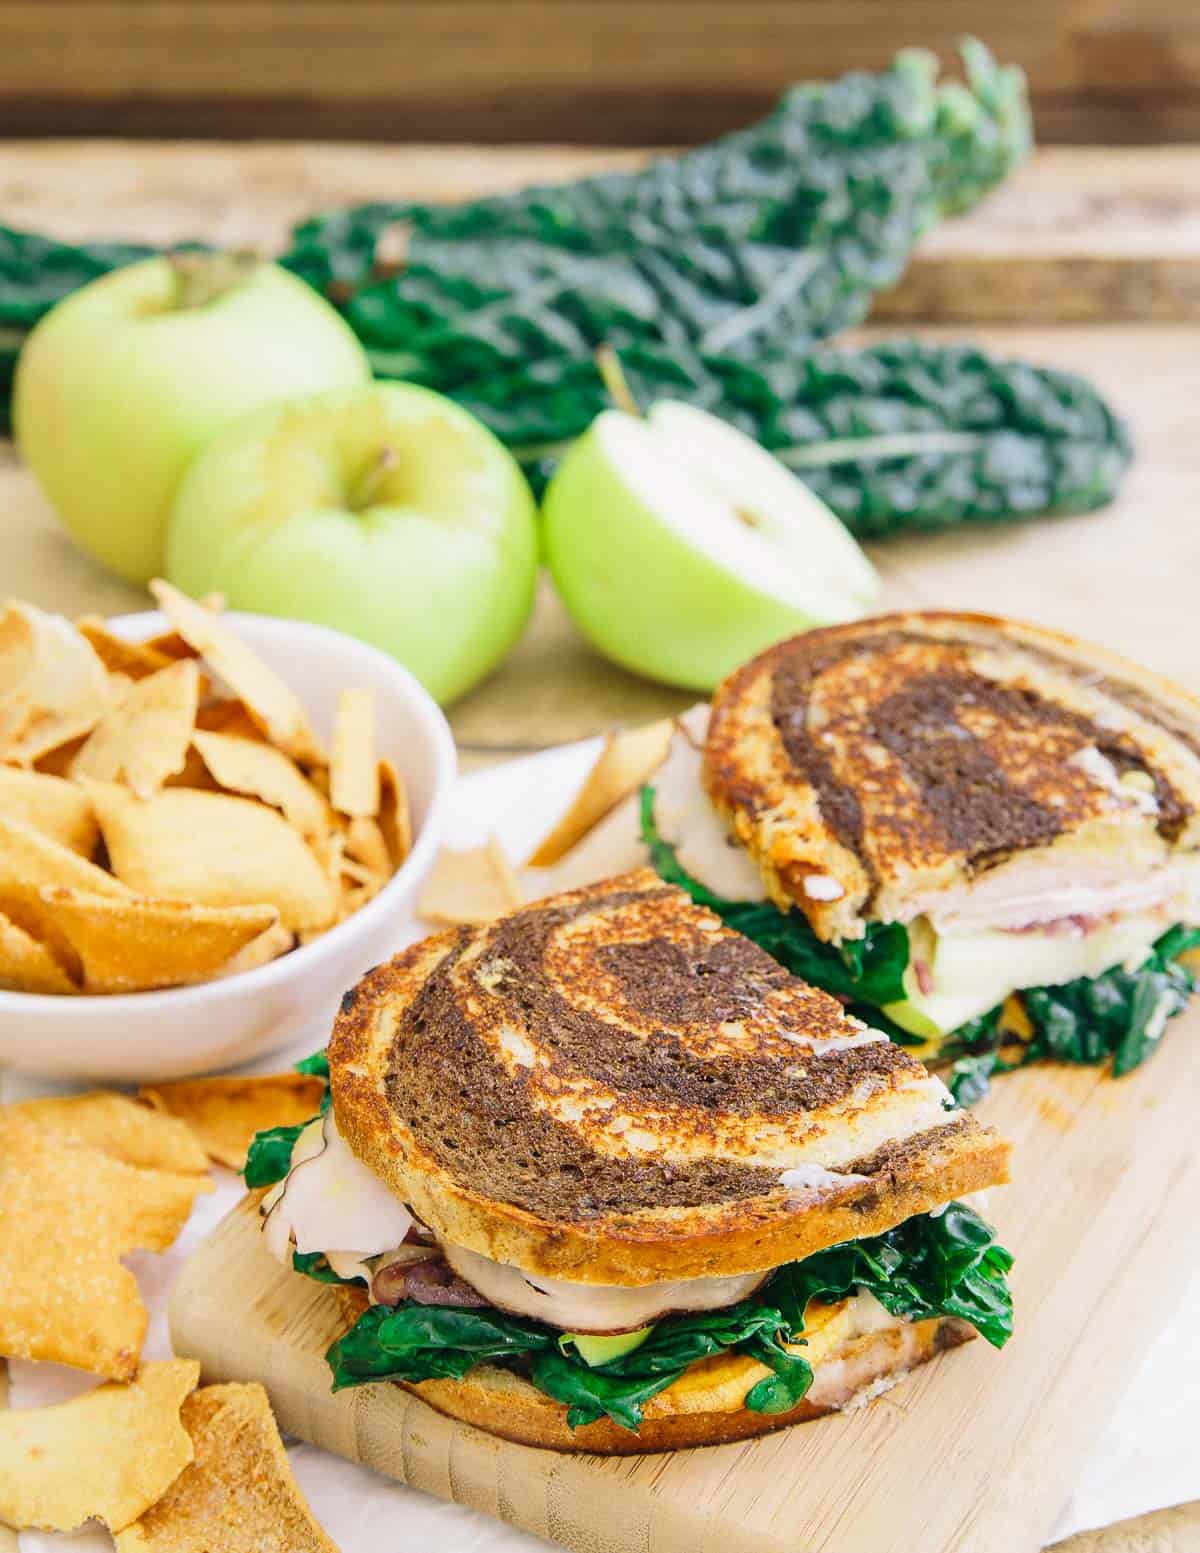 This roasted sweet potato apple ham sandwich is served hot and pressed with a generous amount of melted cheddar cheese and a honey mustard spread. There's a ton going on and you'll love every bite!